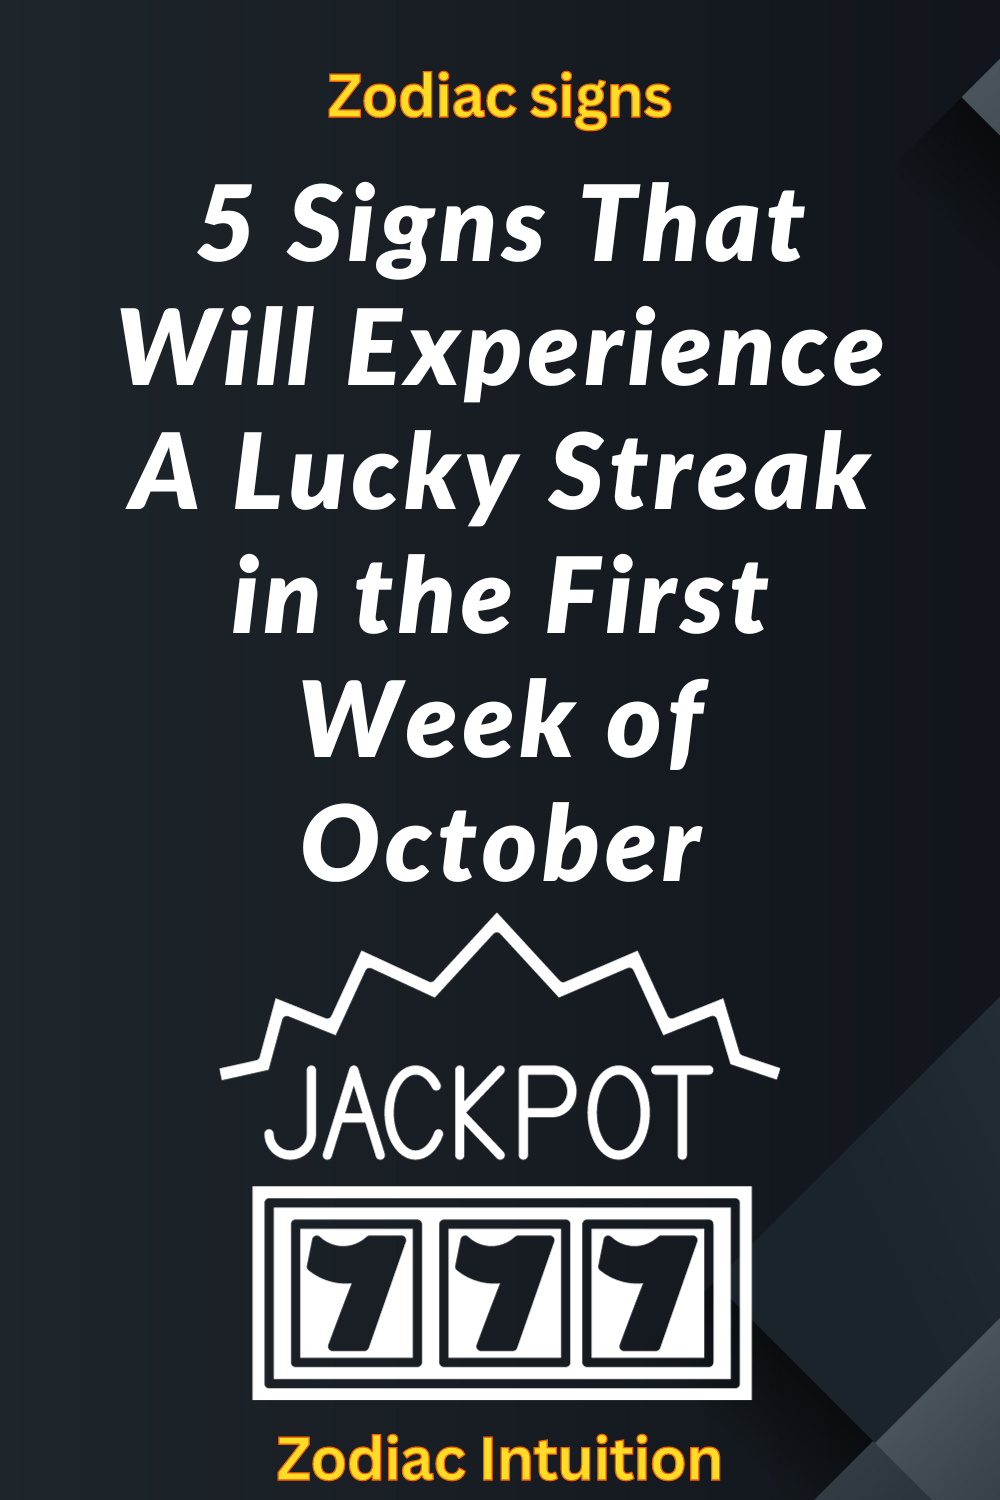 5 Signs That Will Experience a Lucky Streak in the First Week of October